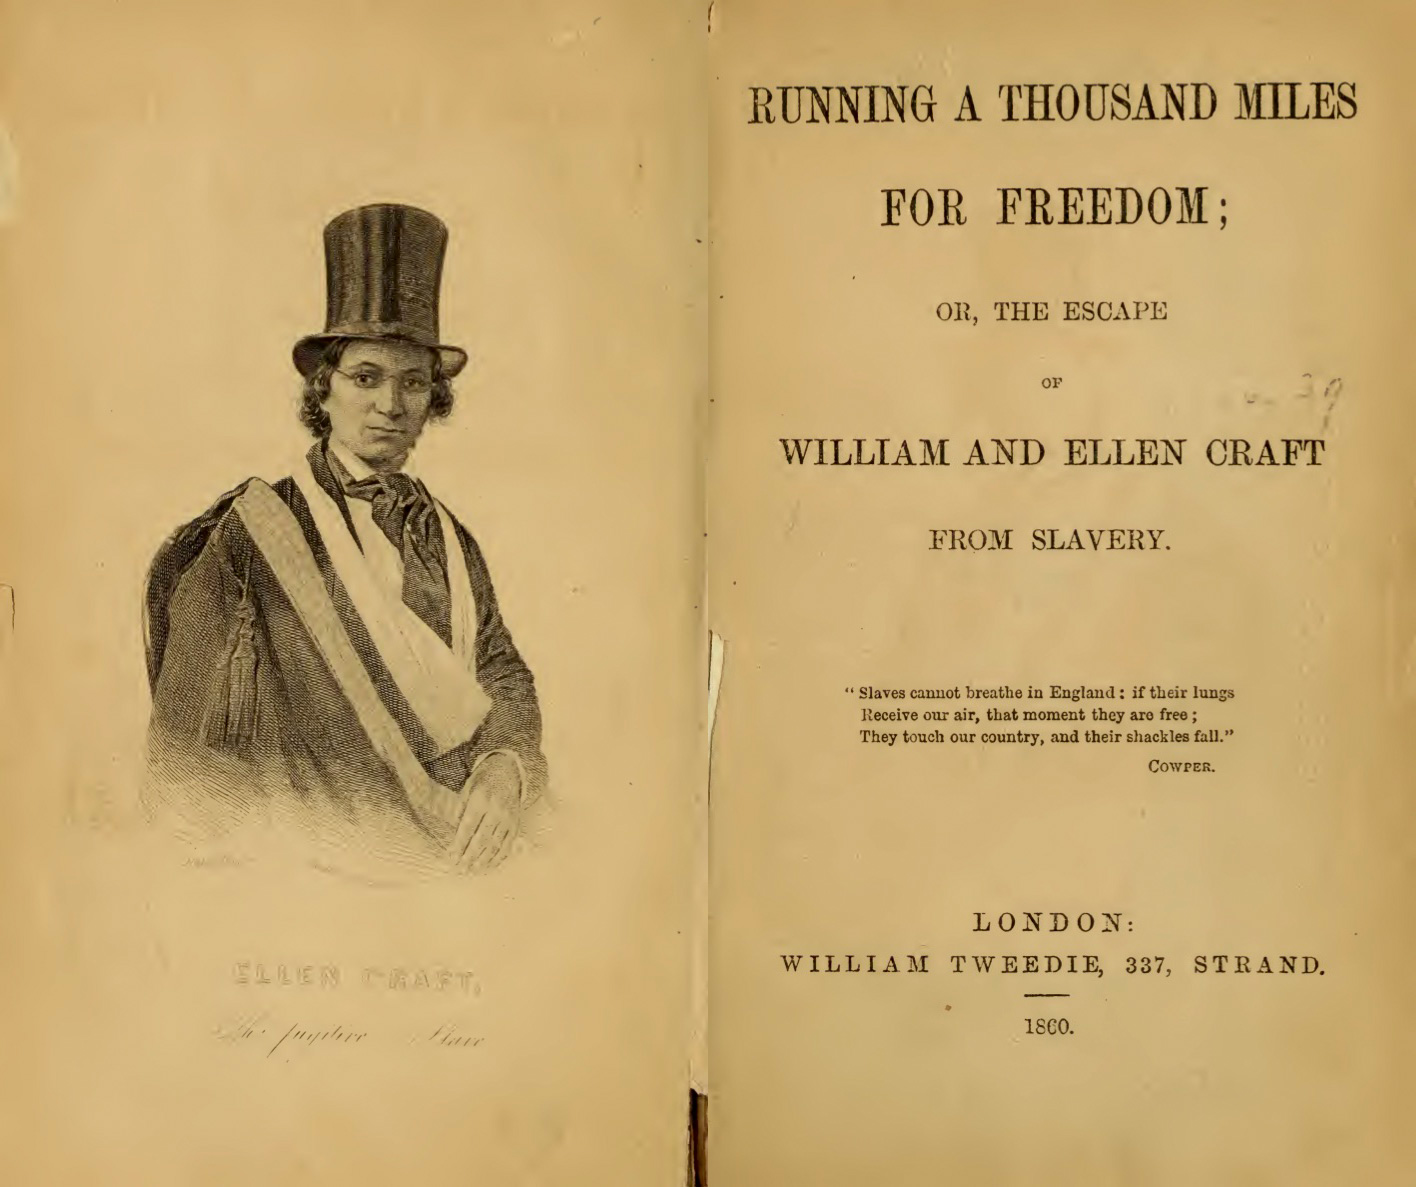 A portrait of Ellen Craft in the book 'Running a Thousand Miles for Freedom.' (Public Domain)